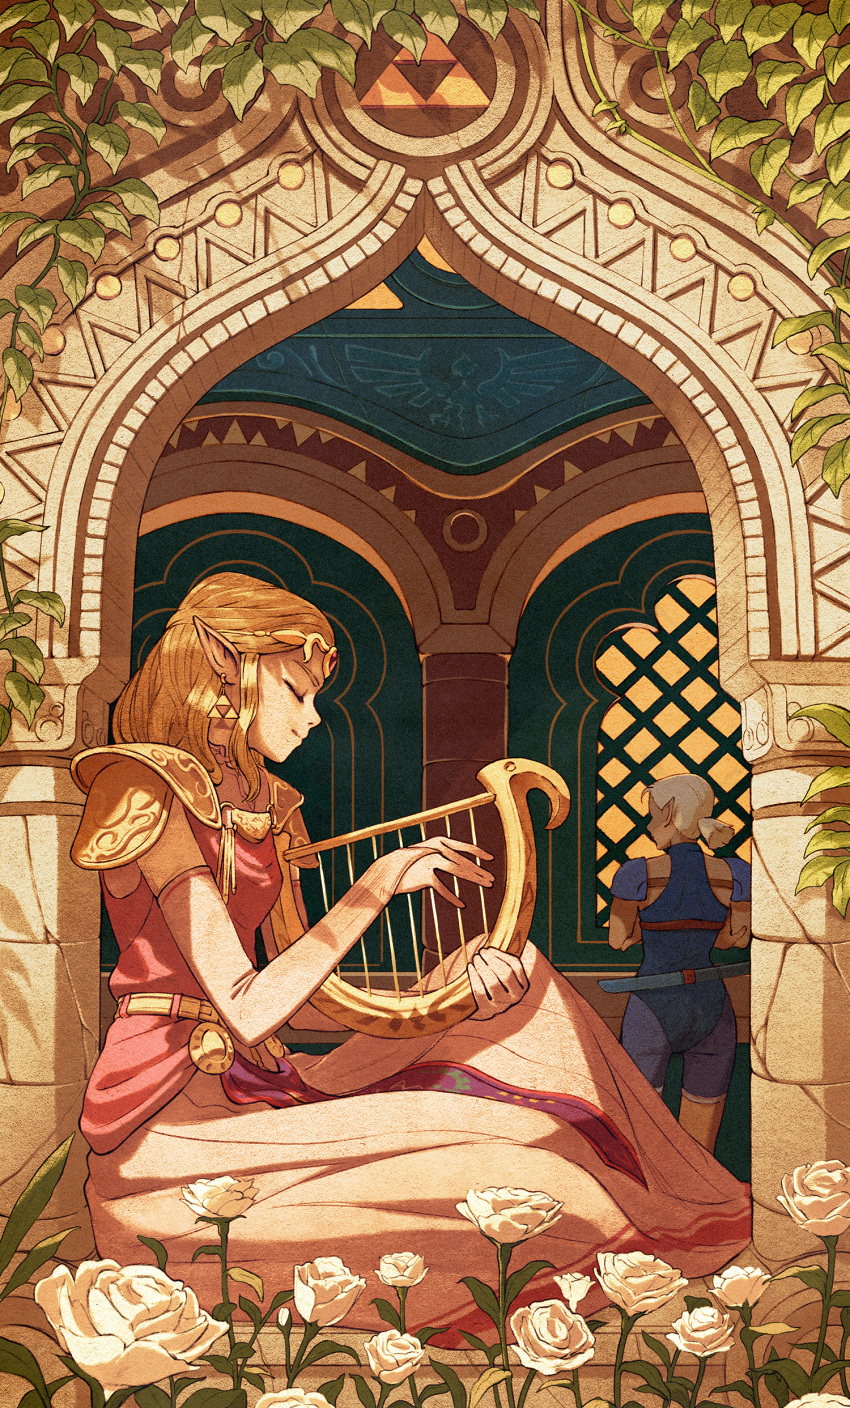 2girls absurdres blonde_hair closed_eyes dress earrings elbow_gloves flower gloves green_hair harp highres impa instrument jewelry kevin_hong multiple_girls music pink_dress plant playing_instrument pointy_ears princess_zelda sitting smile the_legend_of_zelda the_legend_of_zelda:_ocarina_of_time triforce window